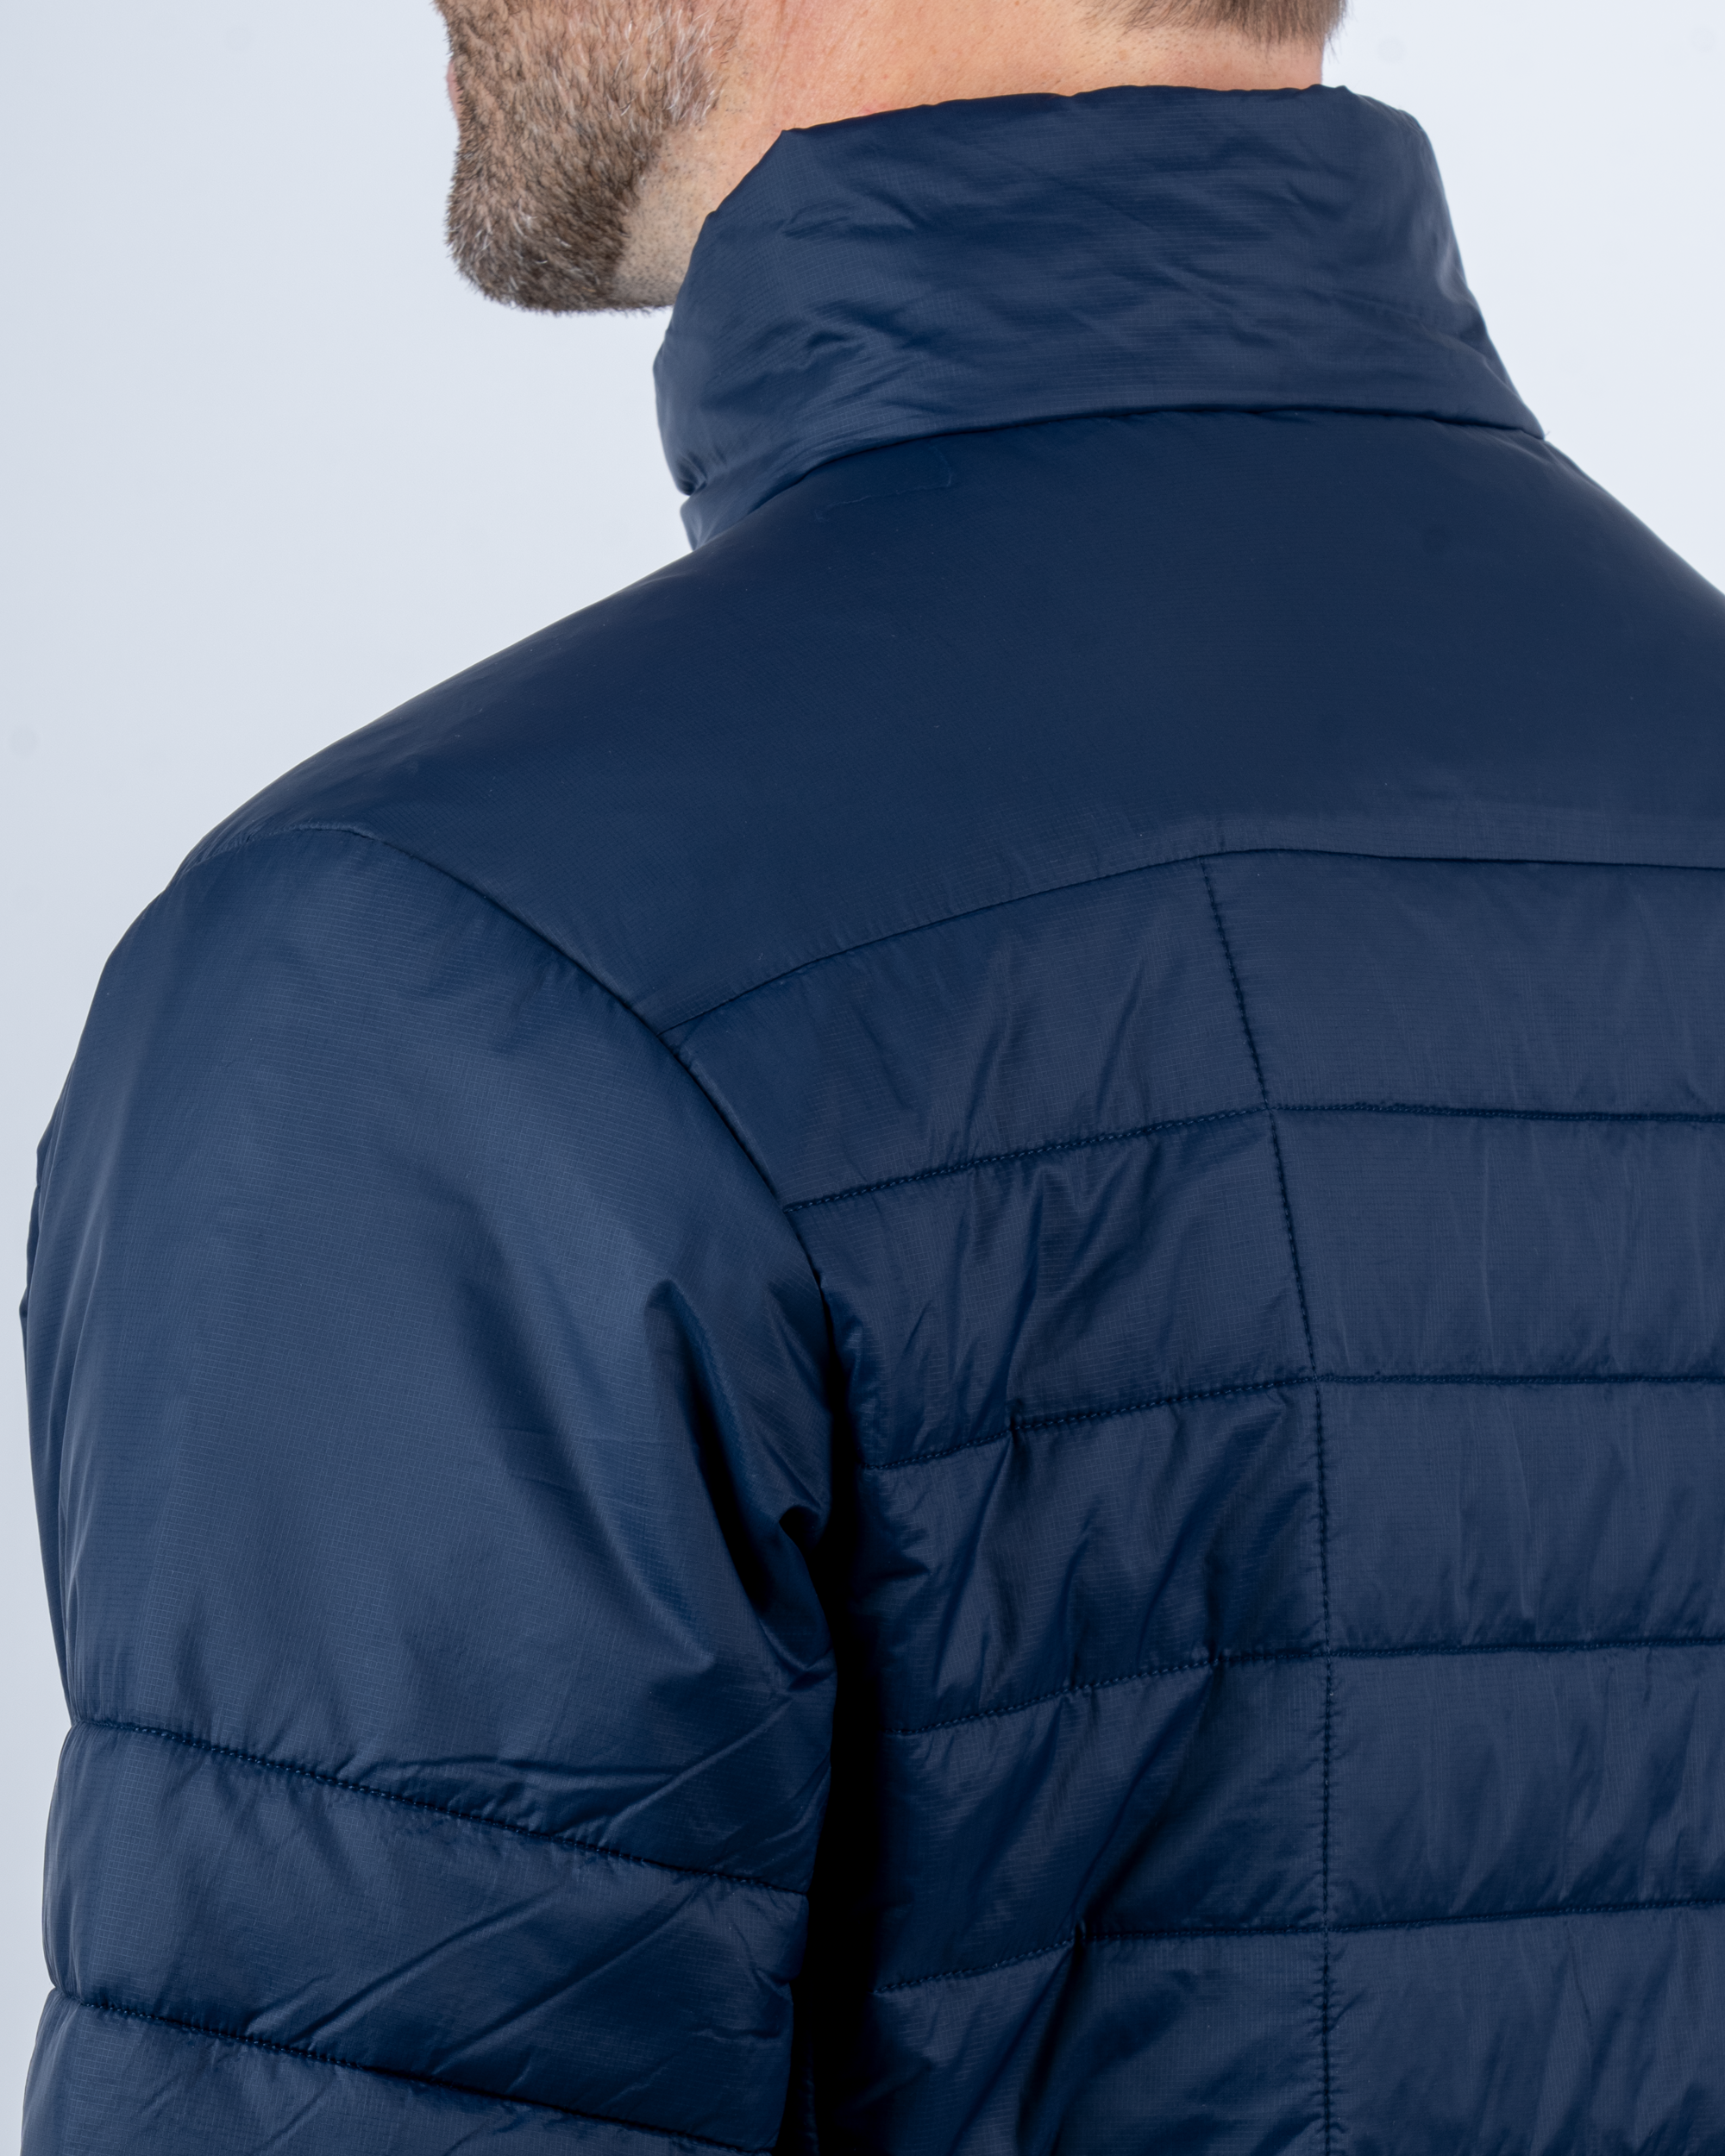 Foreign Rider Co Recycled Primaloft Gold Insulated Eco Navy Jacket Back Shoulder and Neck Detail